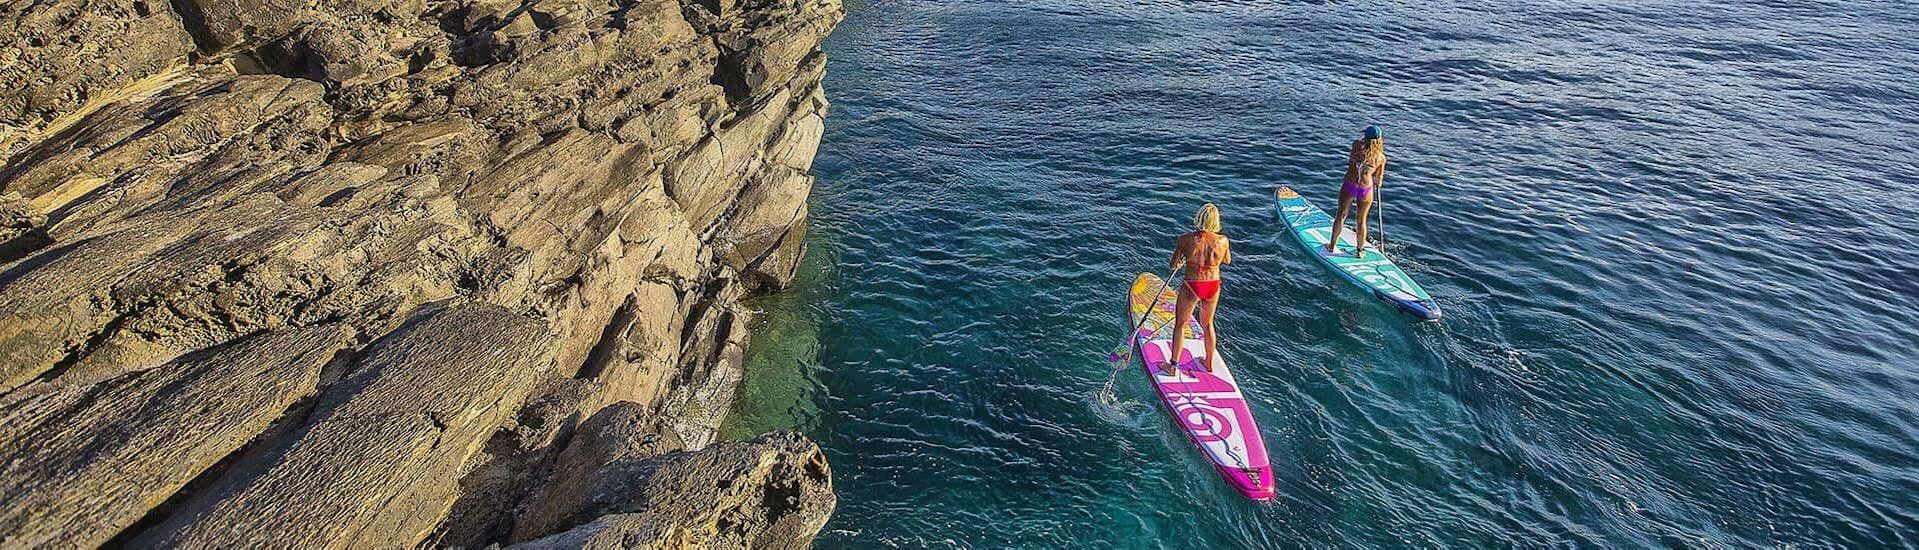 Stand-Up Paddle and Snorkel Adventure - Santorini.